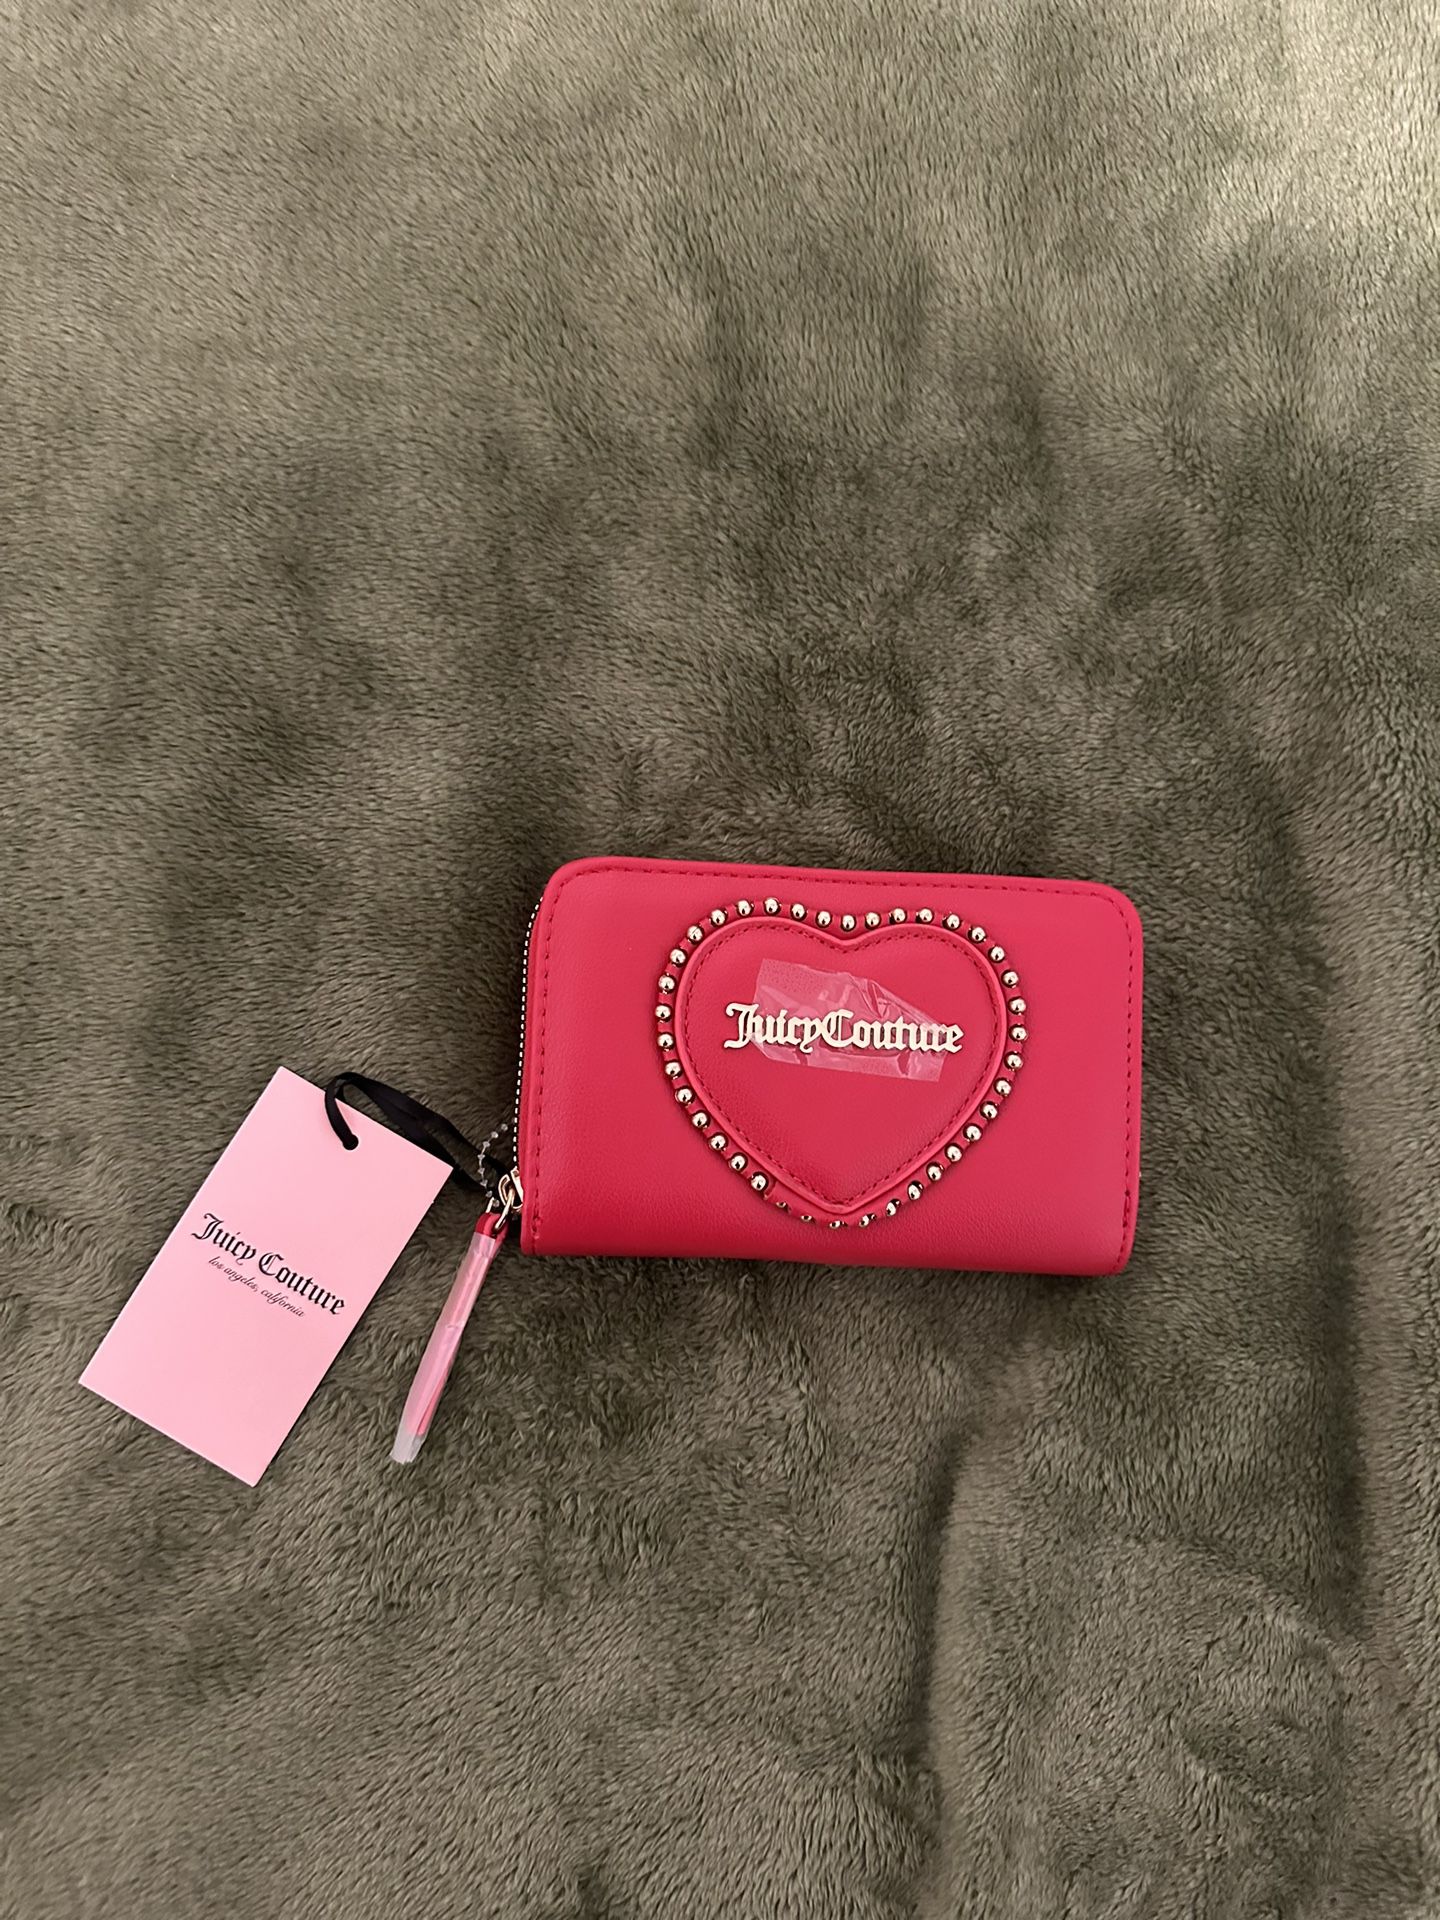 Juicy Couture red heart wallet❤️